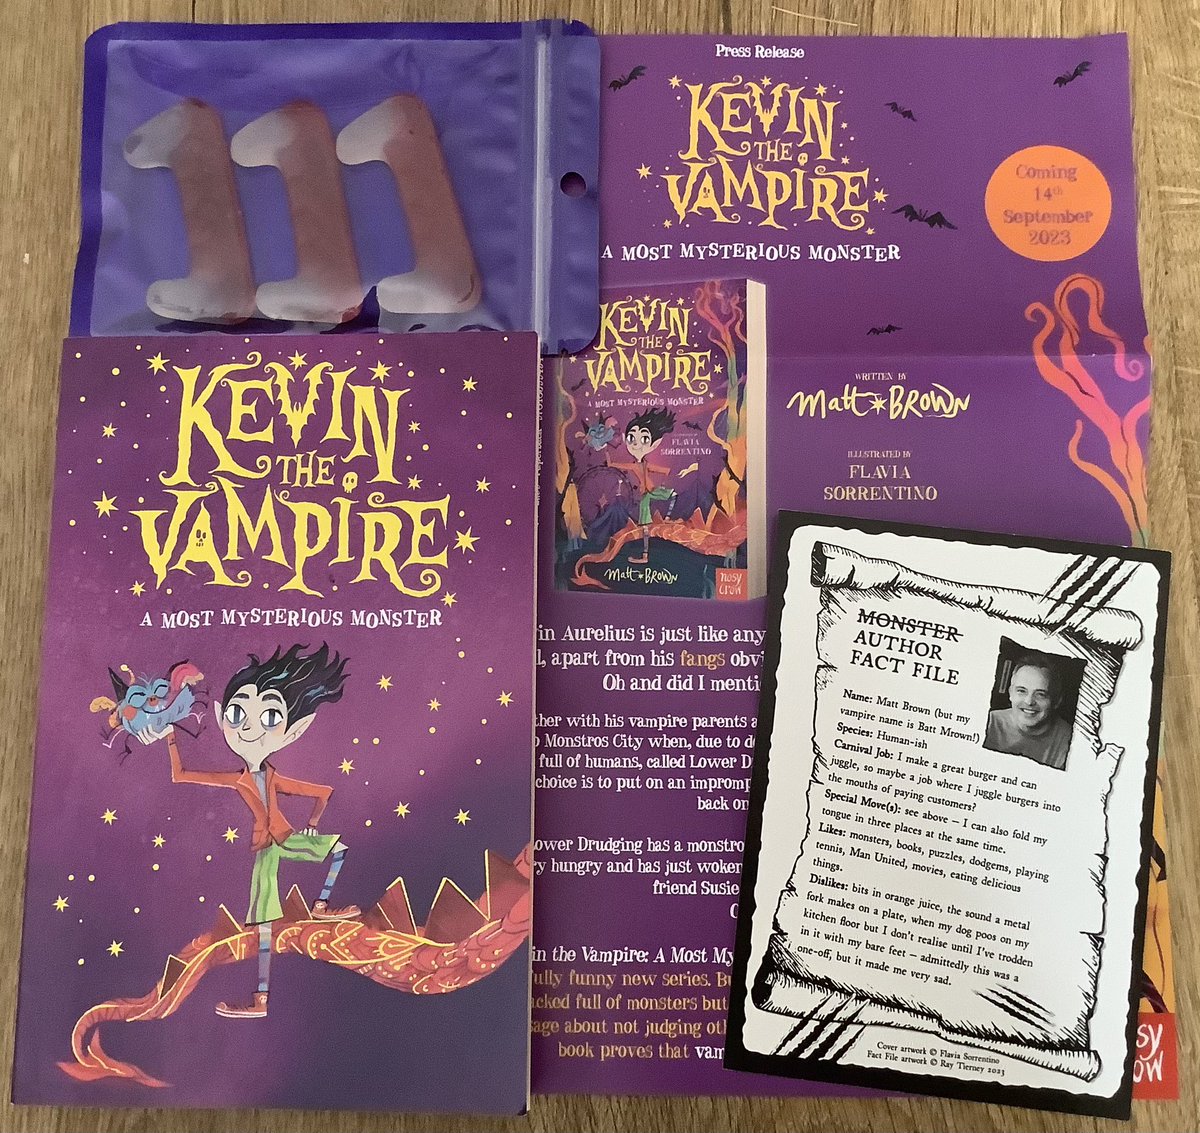 This is going to be such fun!  Can’t wait to join Kevin in Lower Drudging where adventure of the monstrous kind awaits … Out 14th September!  #Fangtastic #KevinTheVampire @mattbrownauthor #FlaviaSorrentino @thesianpages @NosyCrow @TJGriffiths